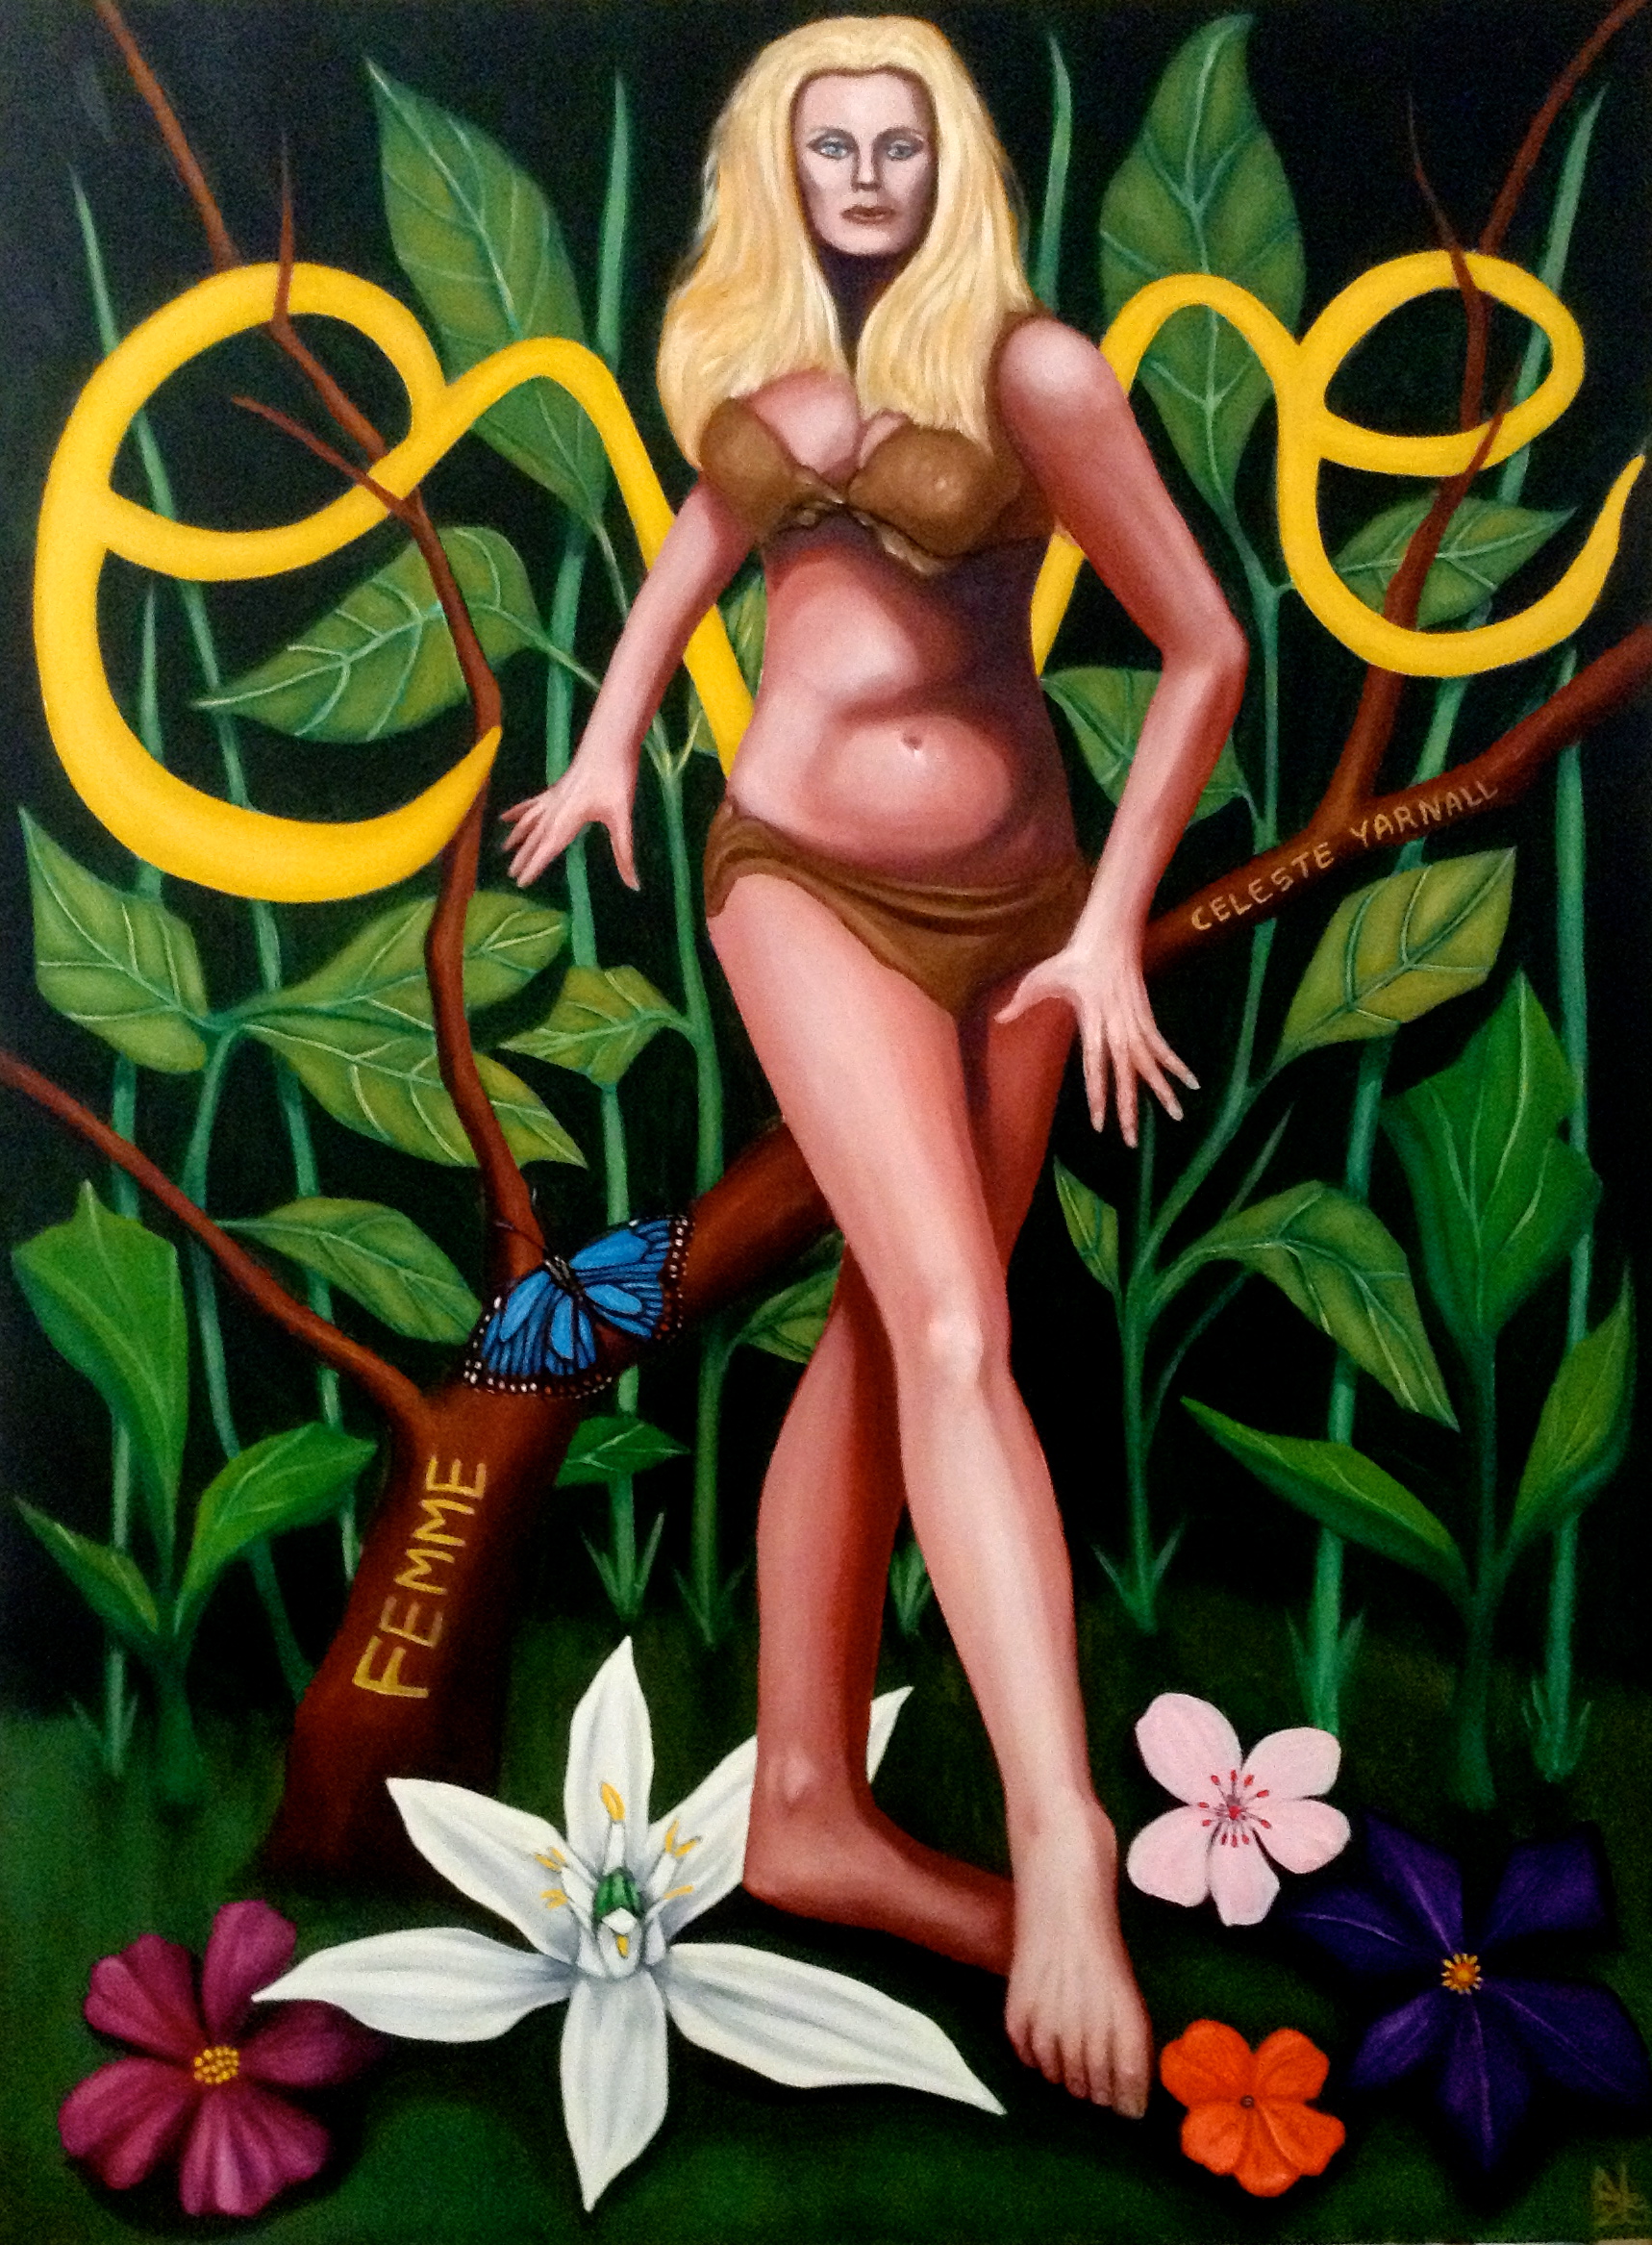 EVE ~ Painting of Celeste Yarnall as EVE ~ Oil on Canvas by Nazim Artist